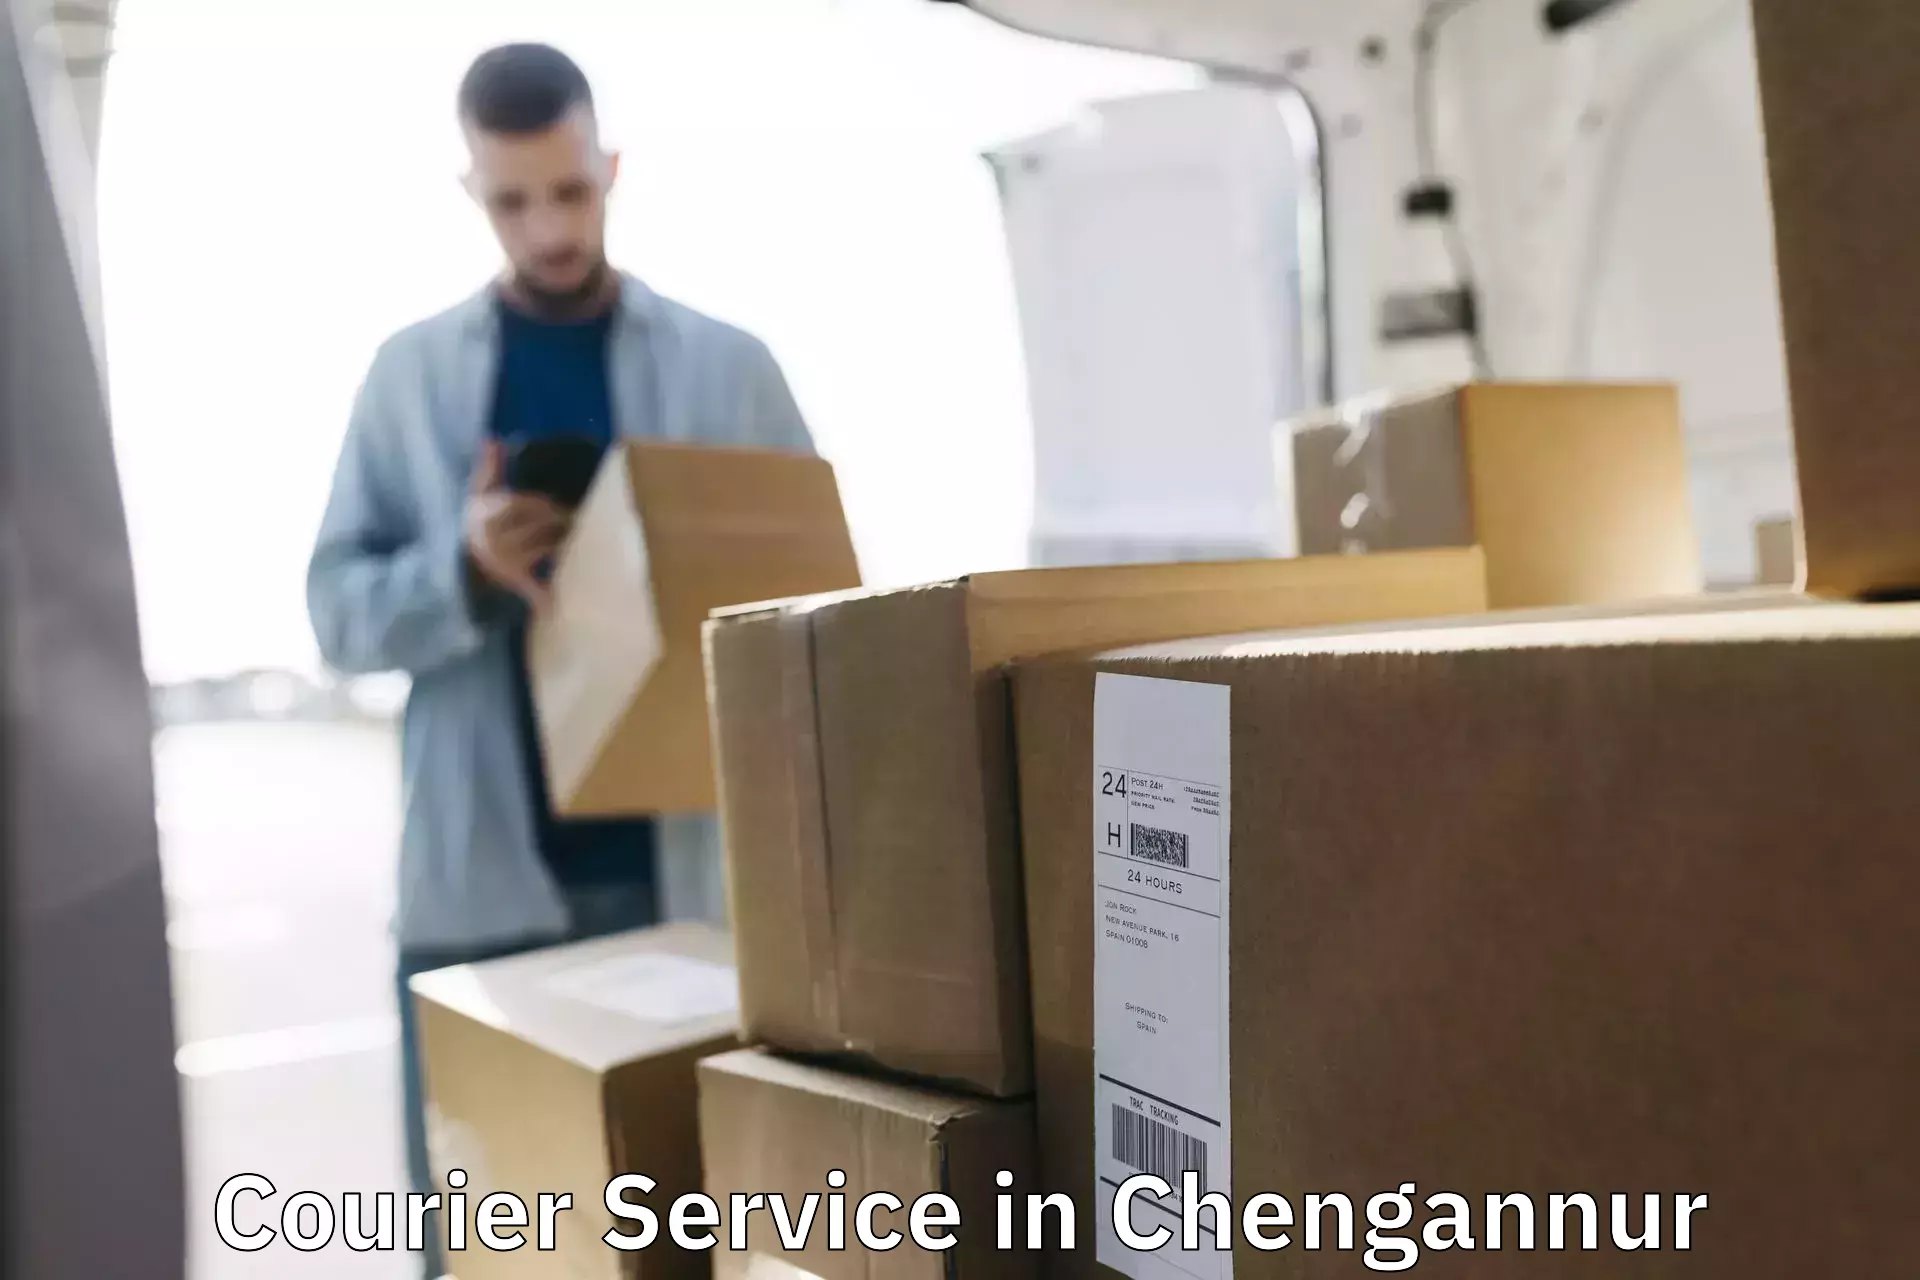 24-hour delivery options in Chengannur